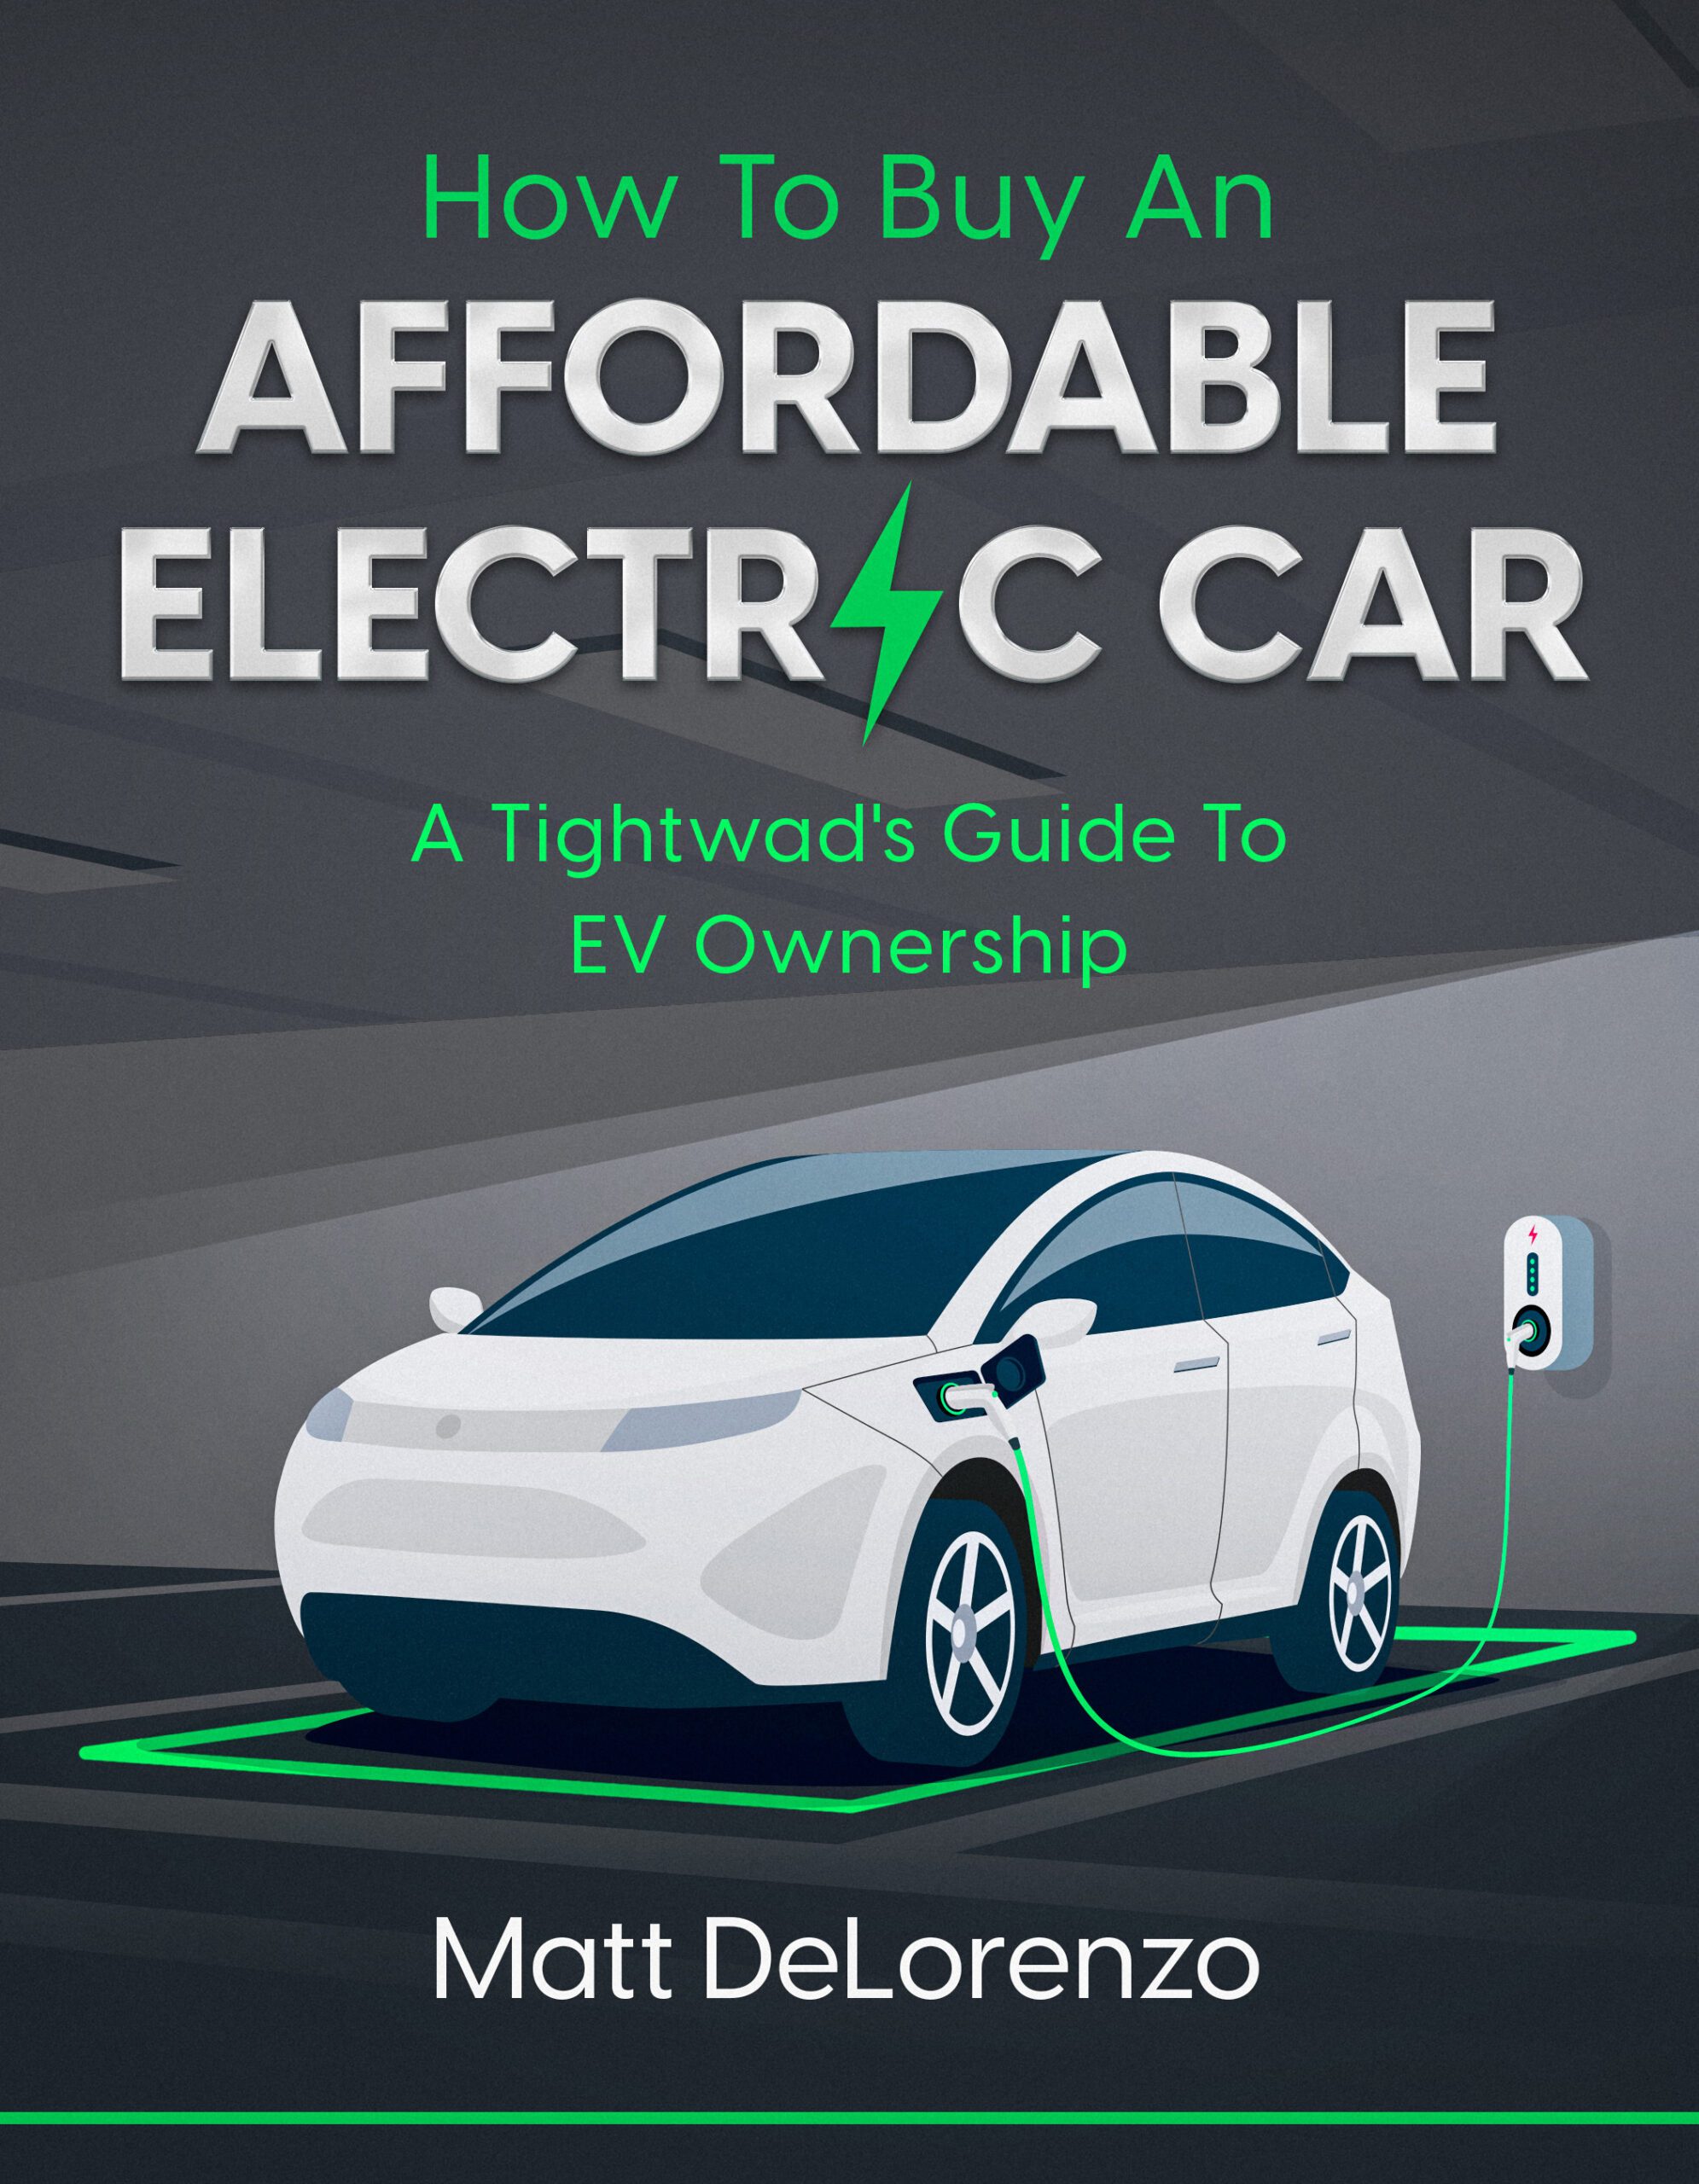 Matt DeLorenzo ’76. The author offers affordable alternatives to Tesla, Lucid and Hummer in the electric car market, as well as how to shop for, buy and own an EV.